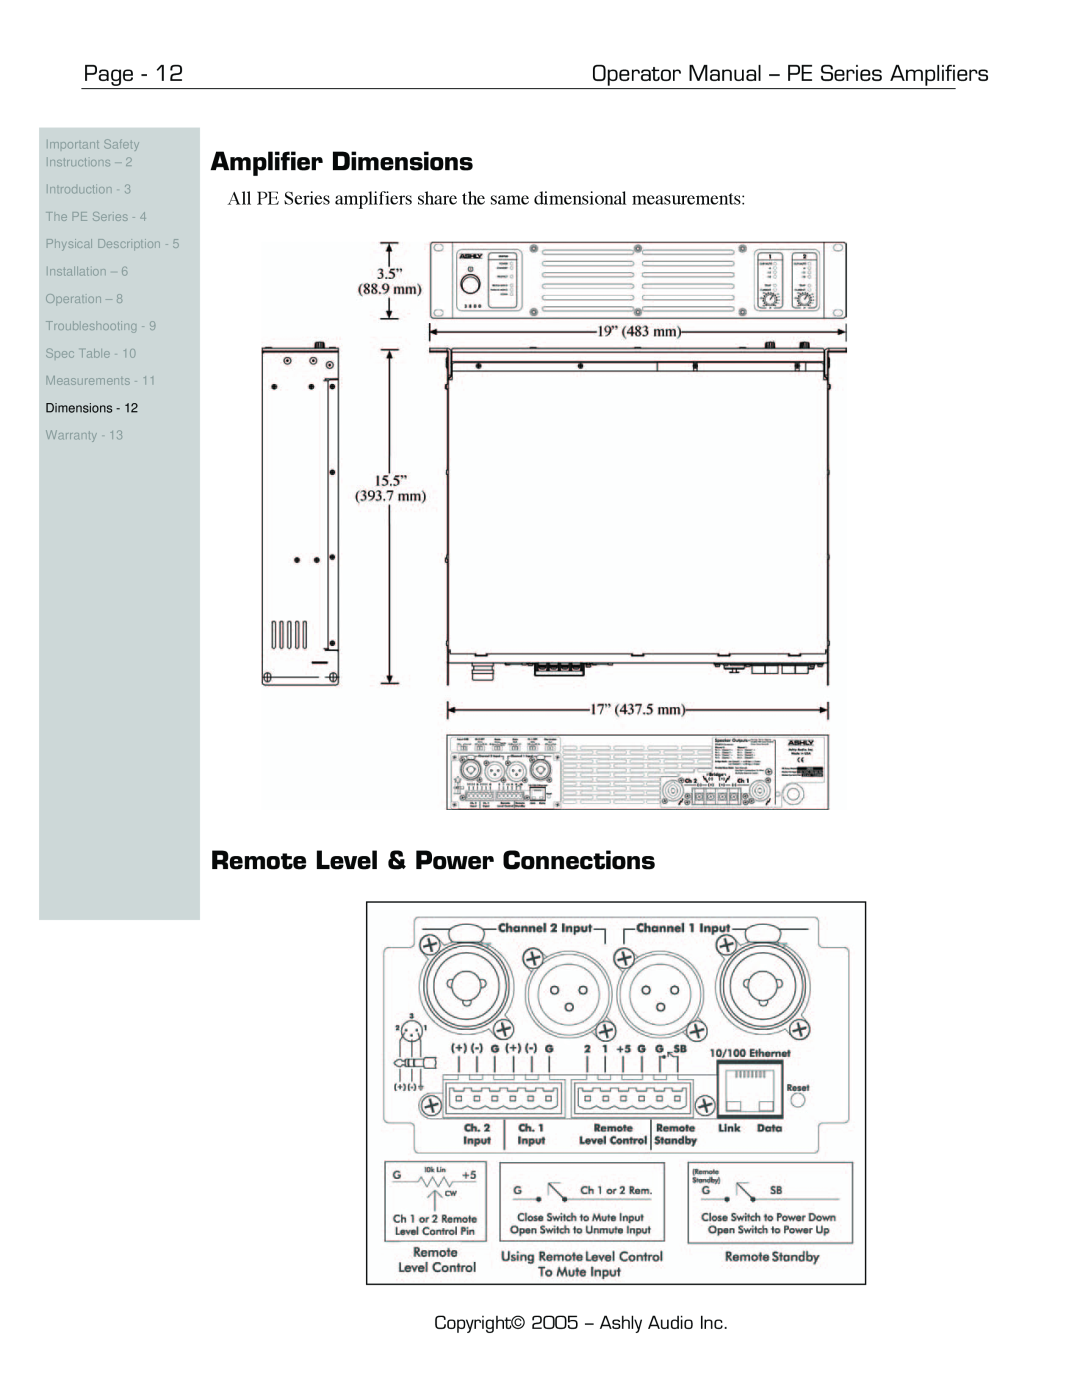 Ashly PE-Series manual Amplifier Dimensions, Remote Level & Power Connections, Page, Operator Manual - PE Series Amplifiers 